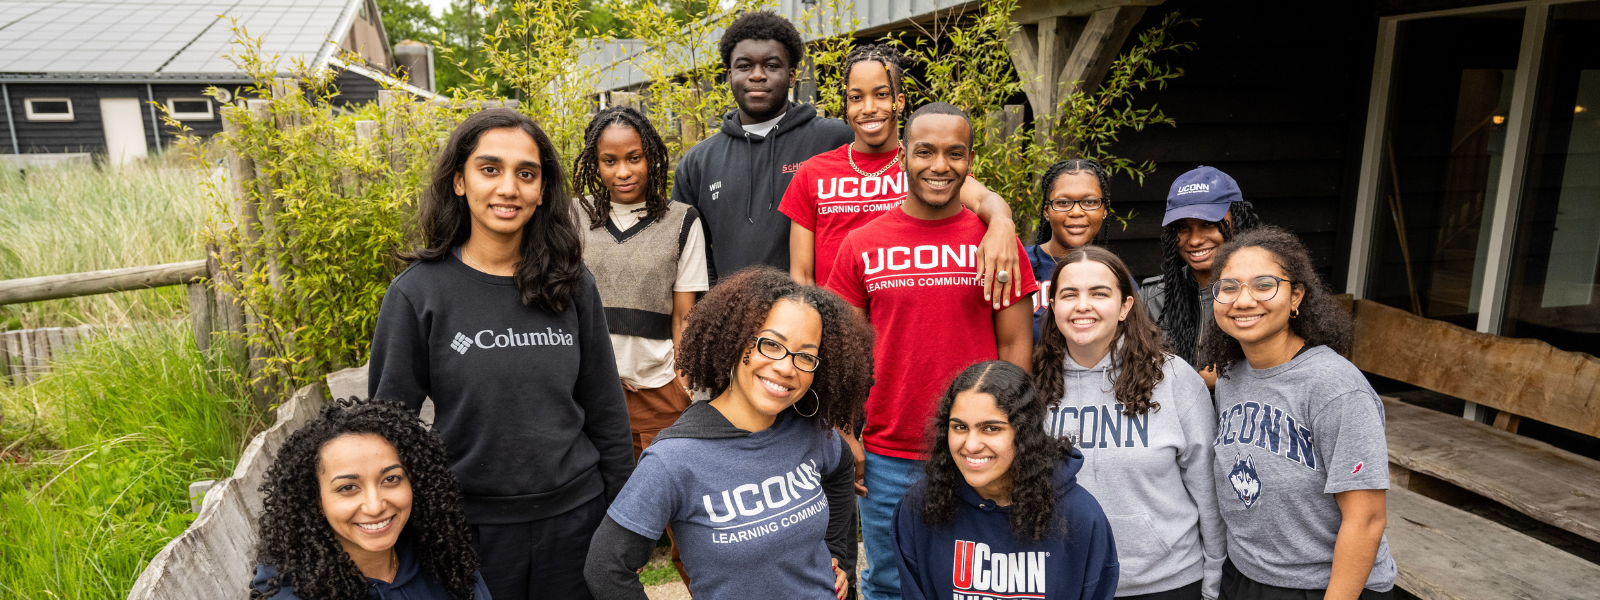 A group of UConn students pose for a group photo in the Netherlands